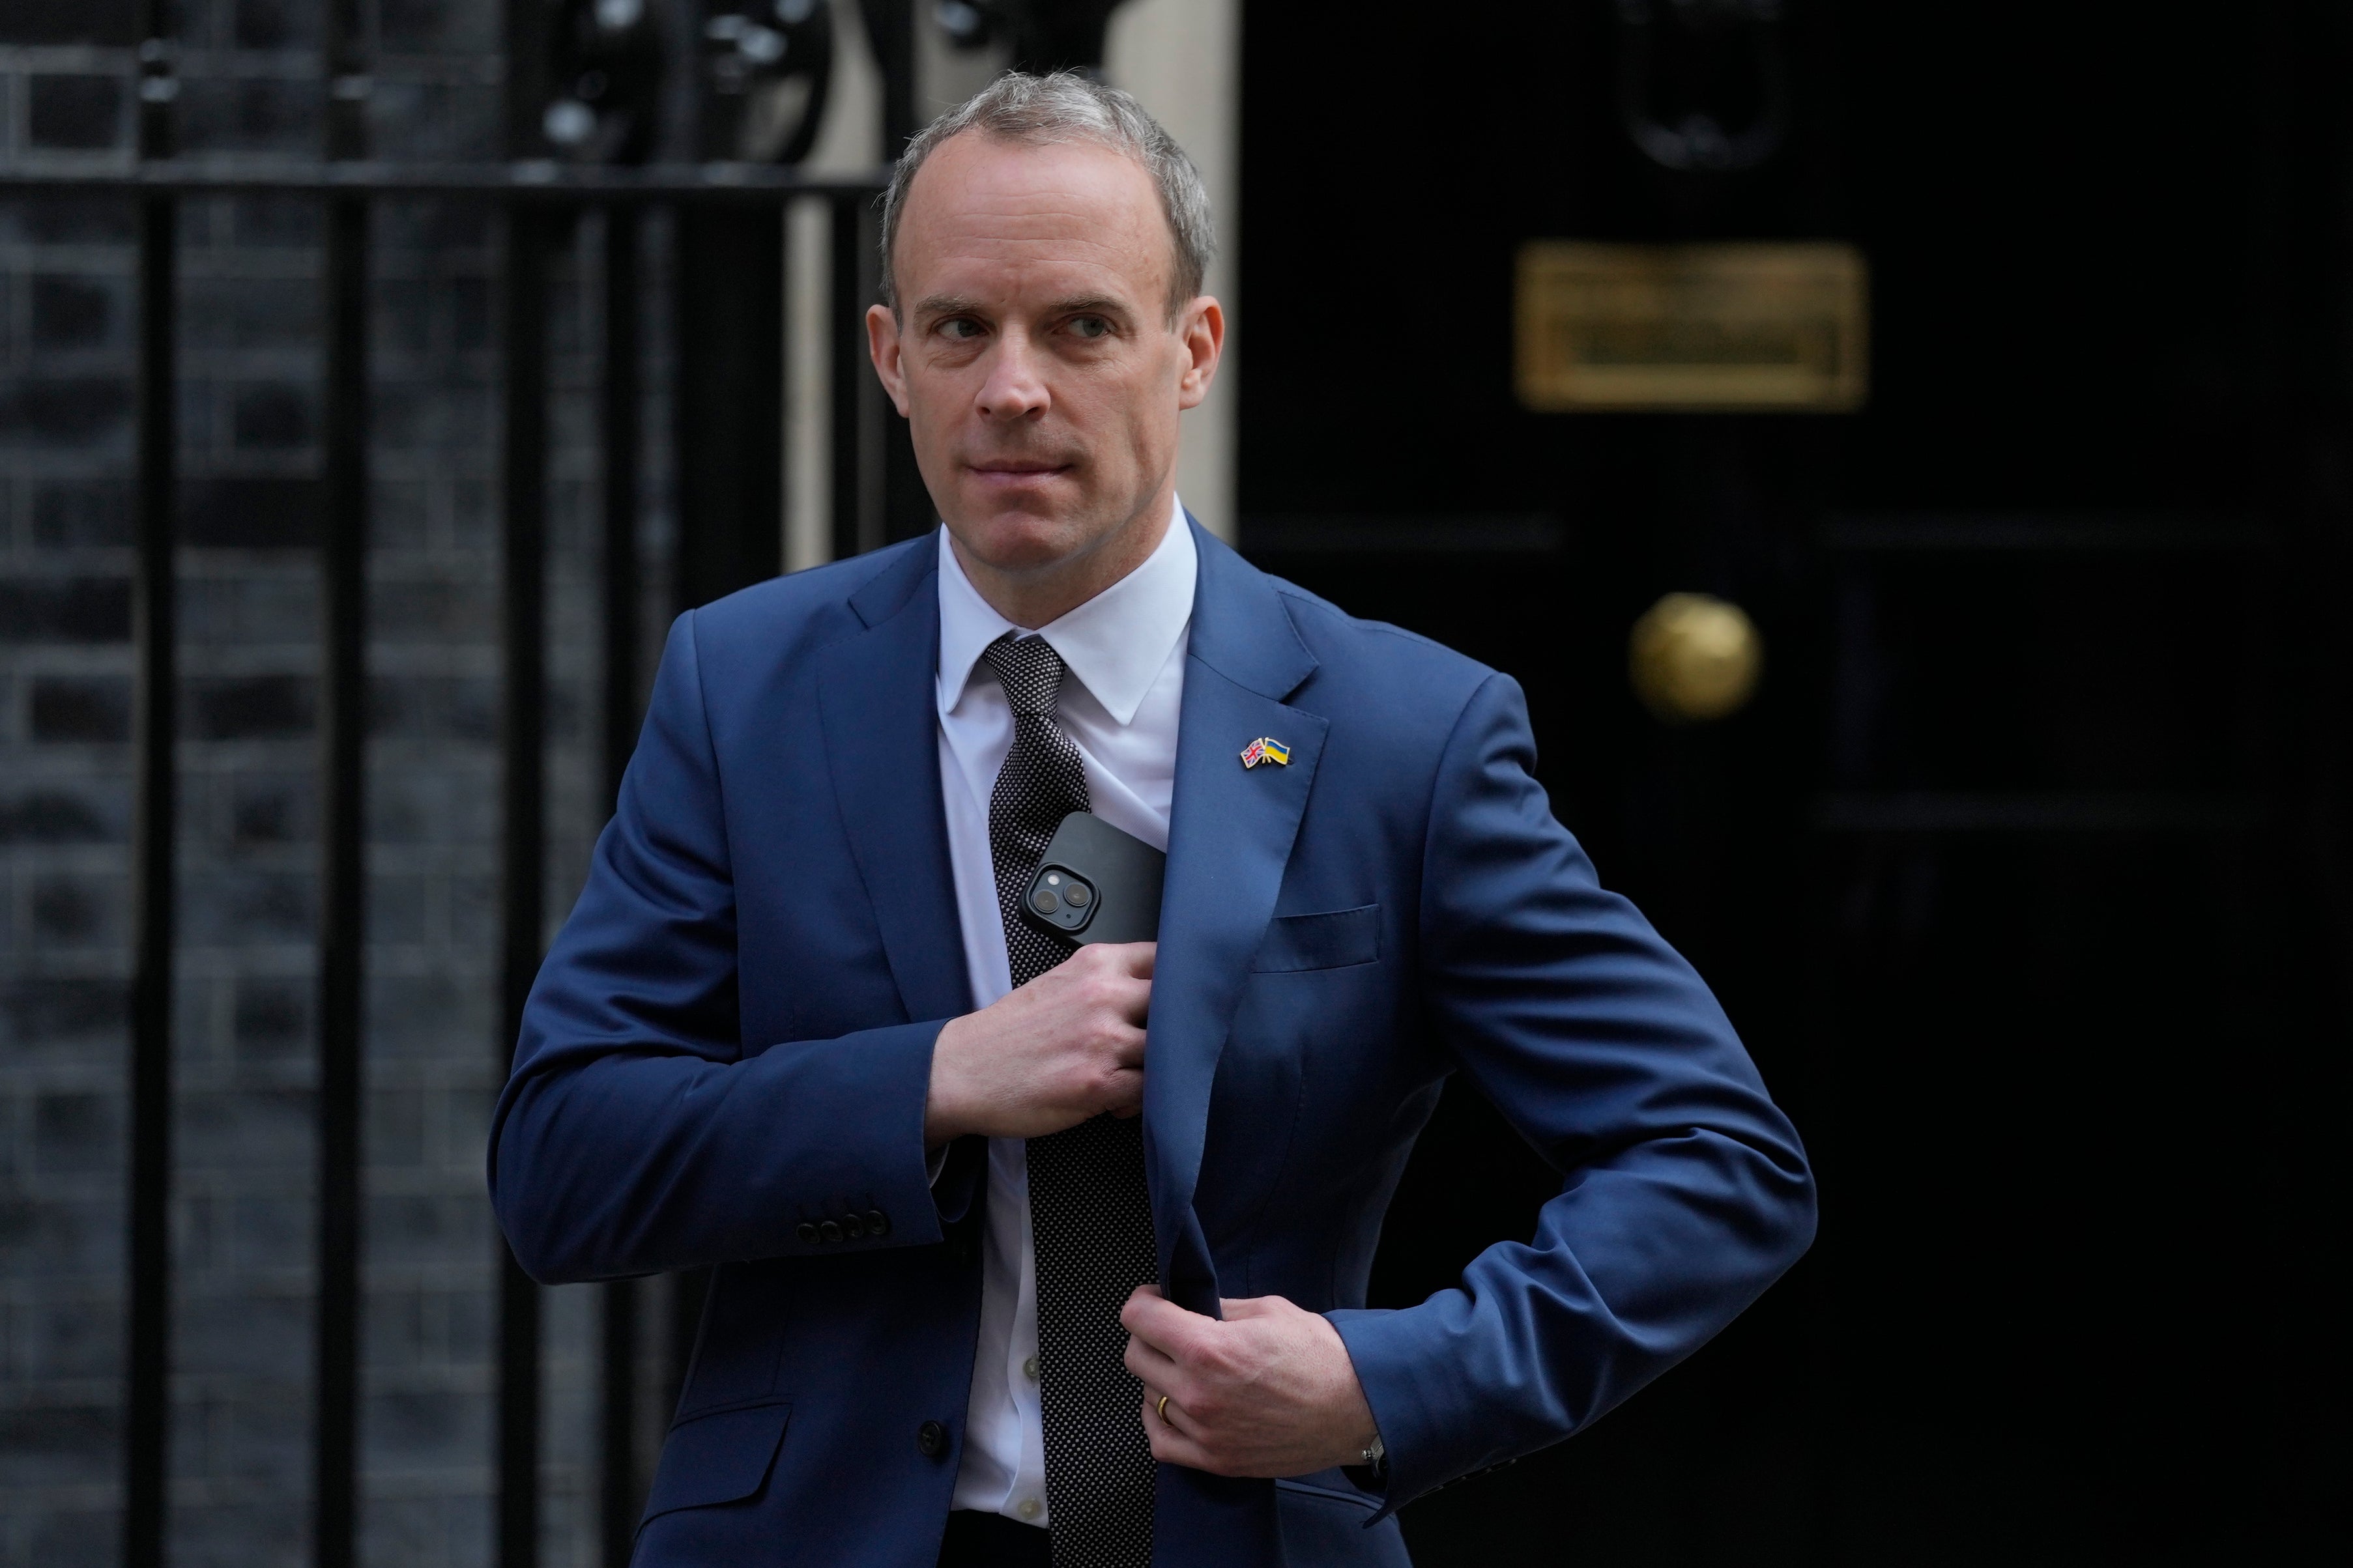 Dominic Raab was also a potential victim